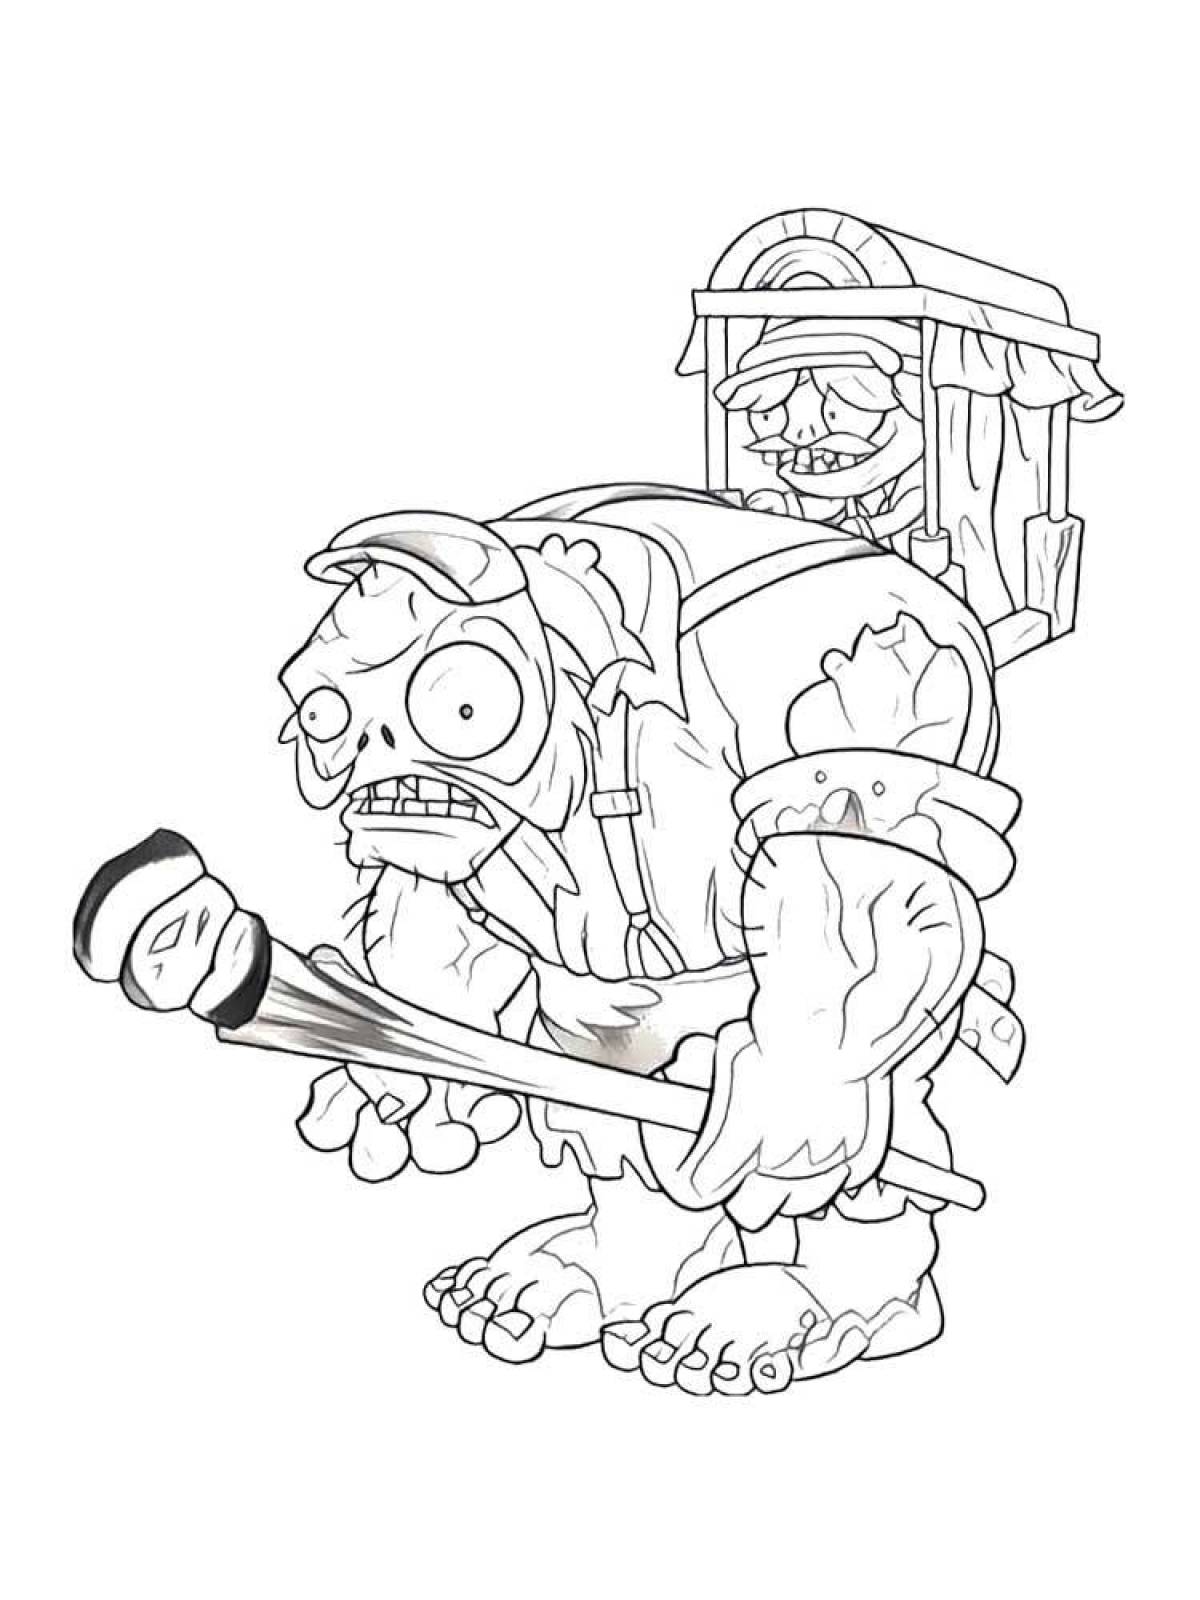 Chilling Zombie Coloring Page